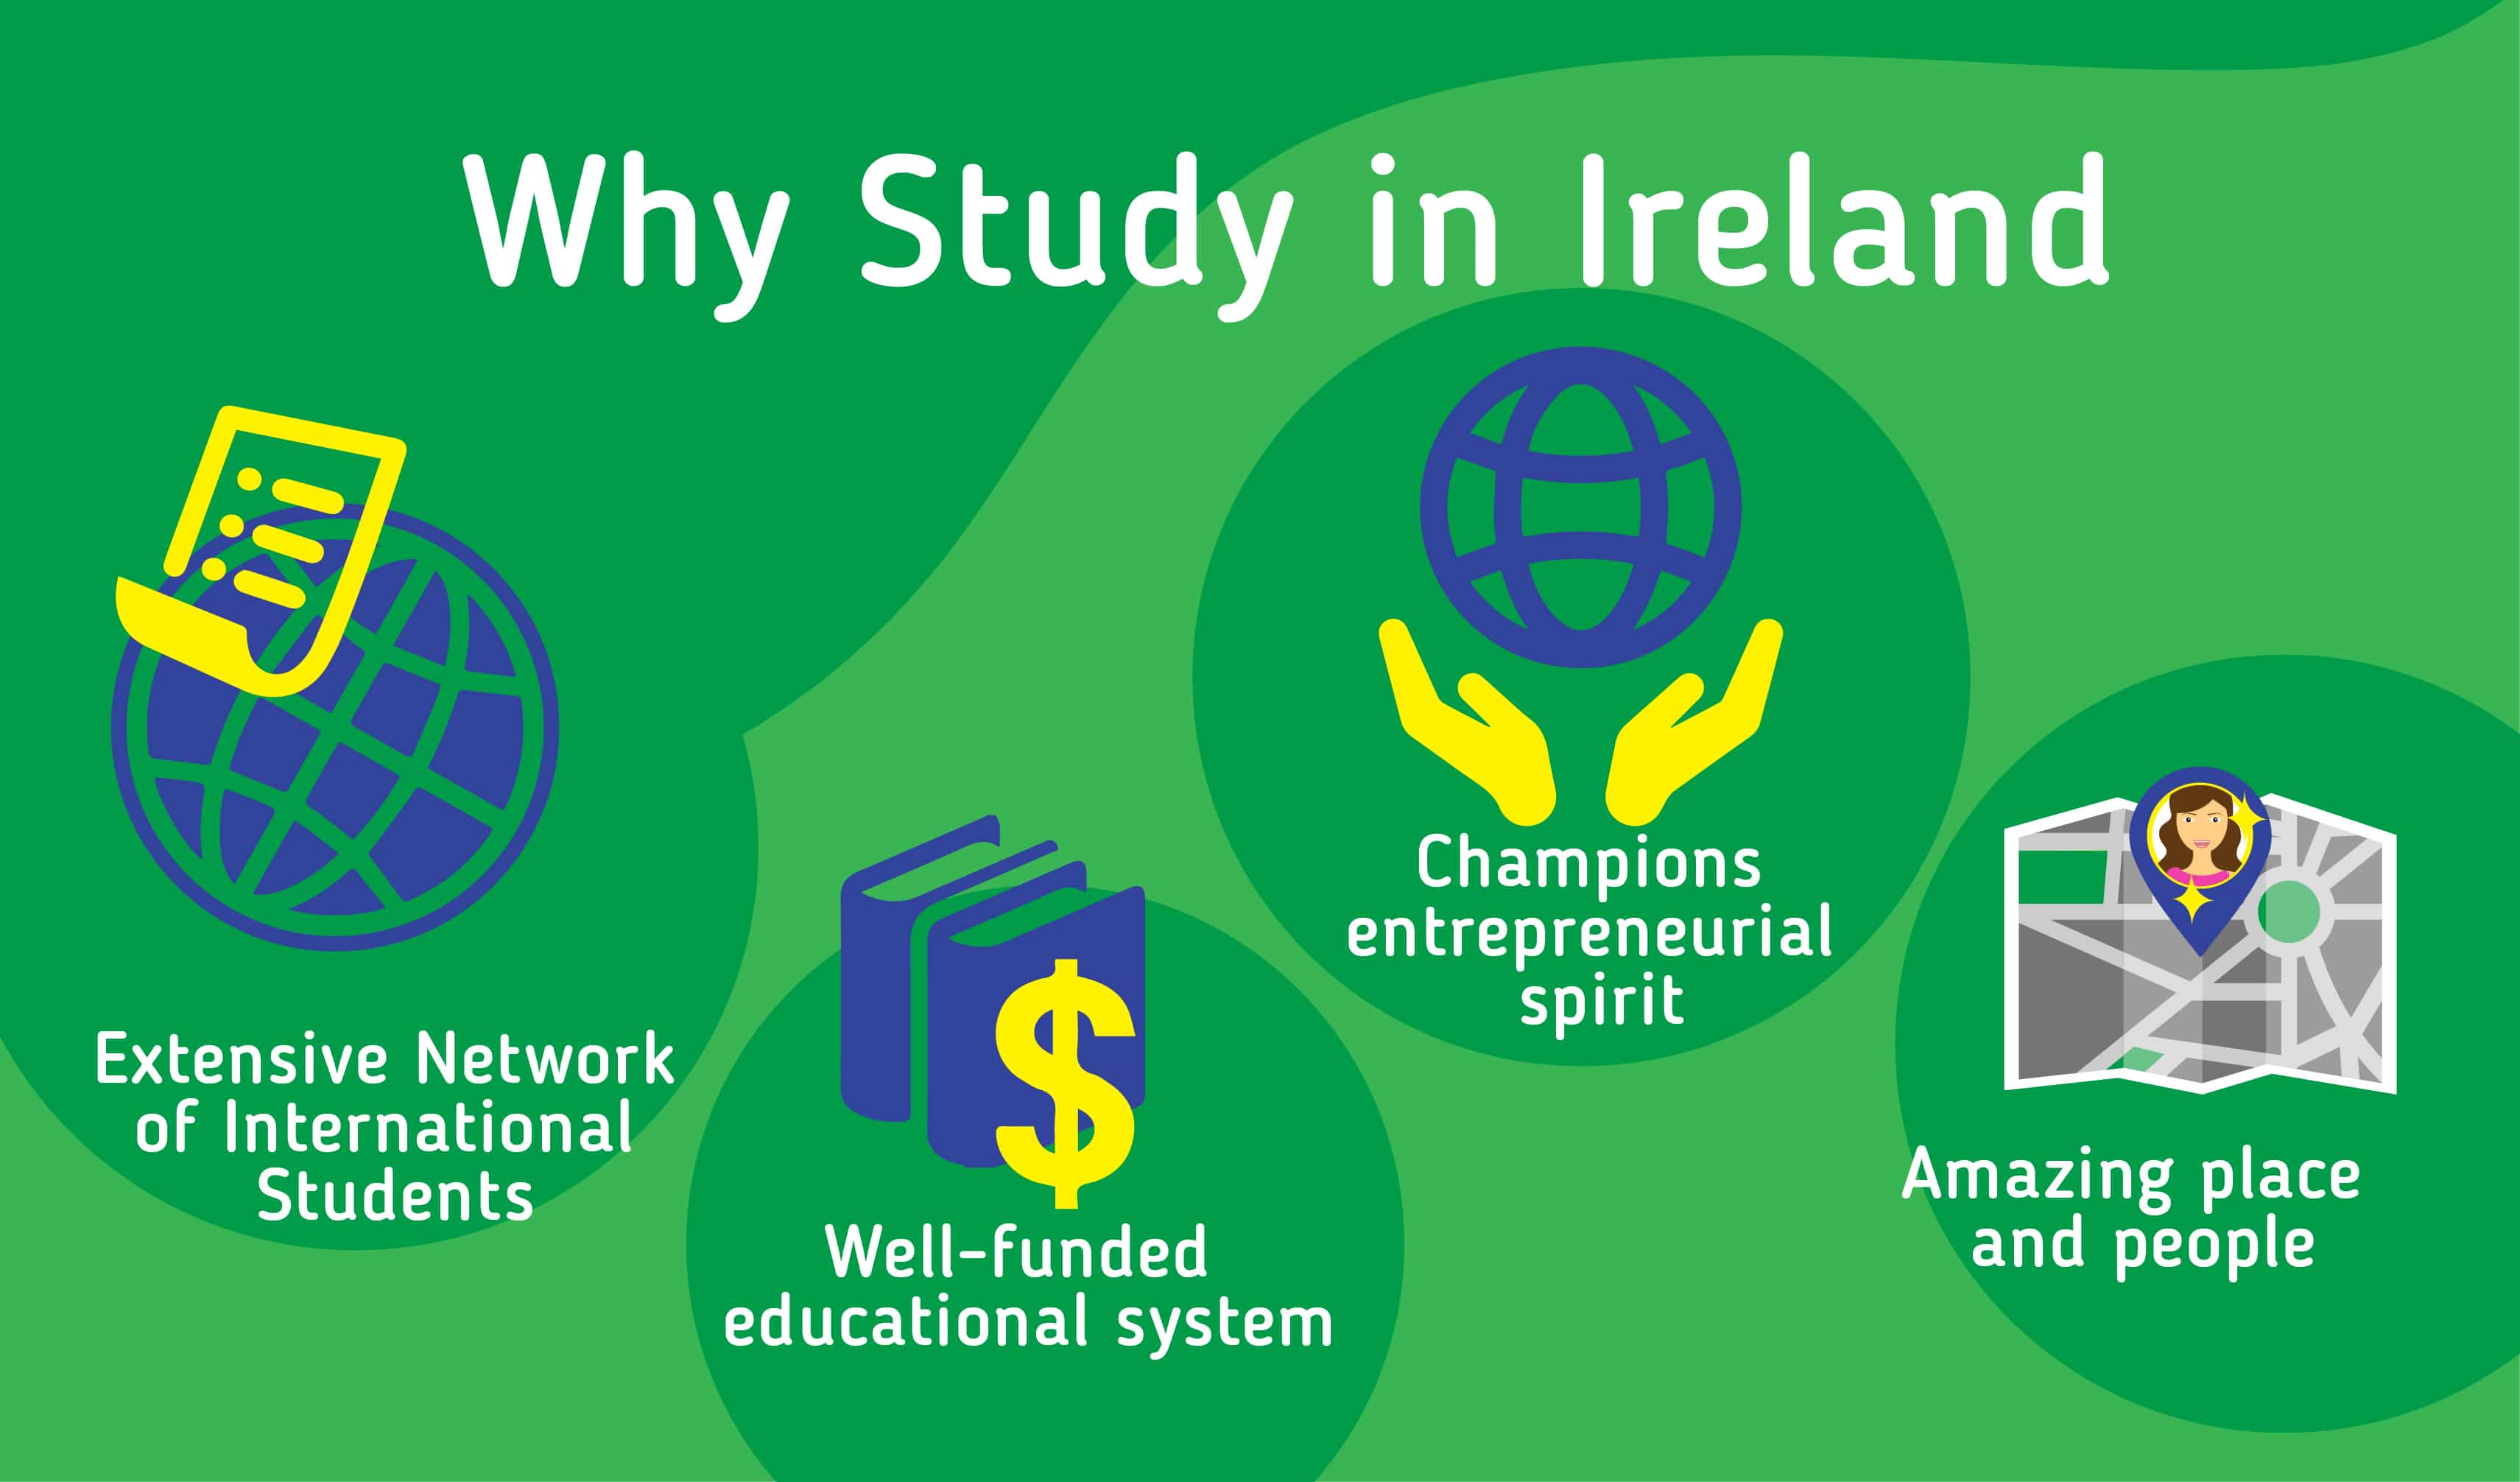 Why should you study in Ireland? Extensive network of internationals students - Well-funded educational system - Champions entrepreneurial spirit - Amazing place and people